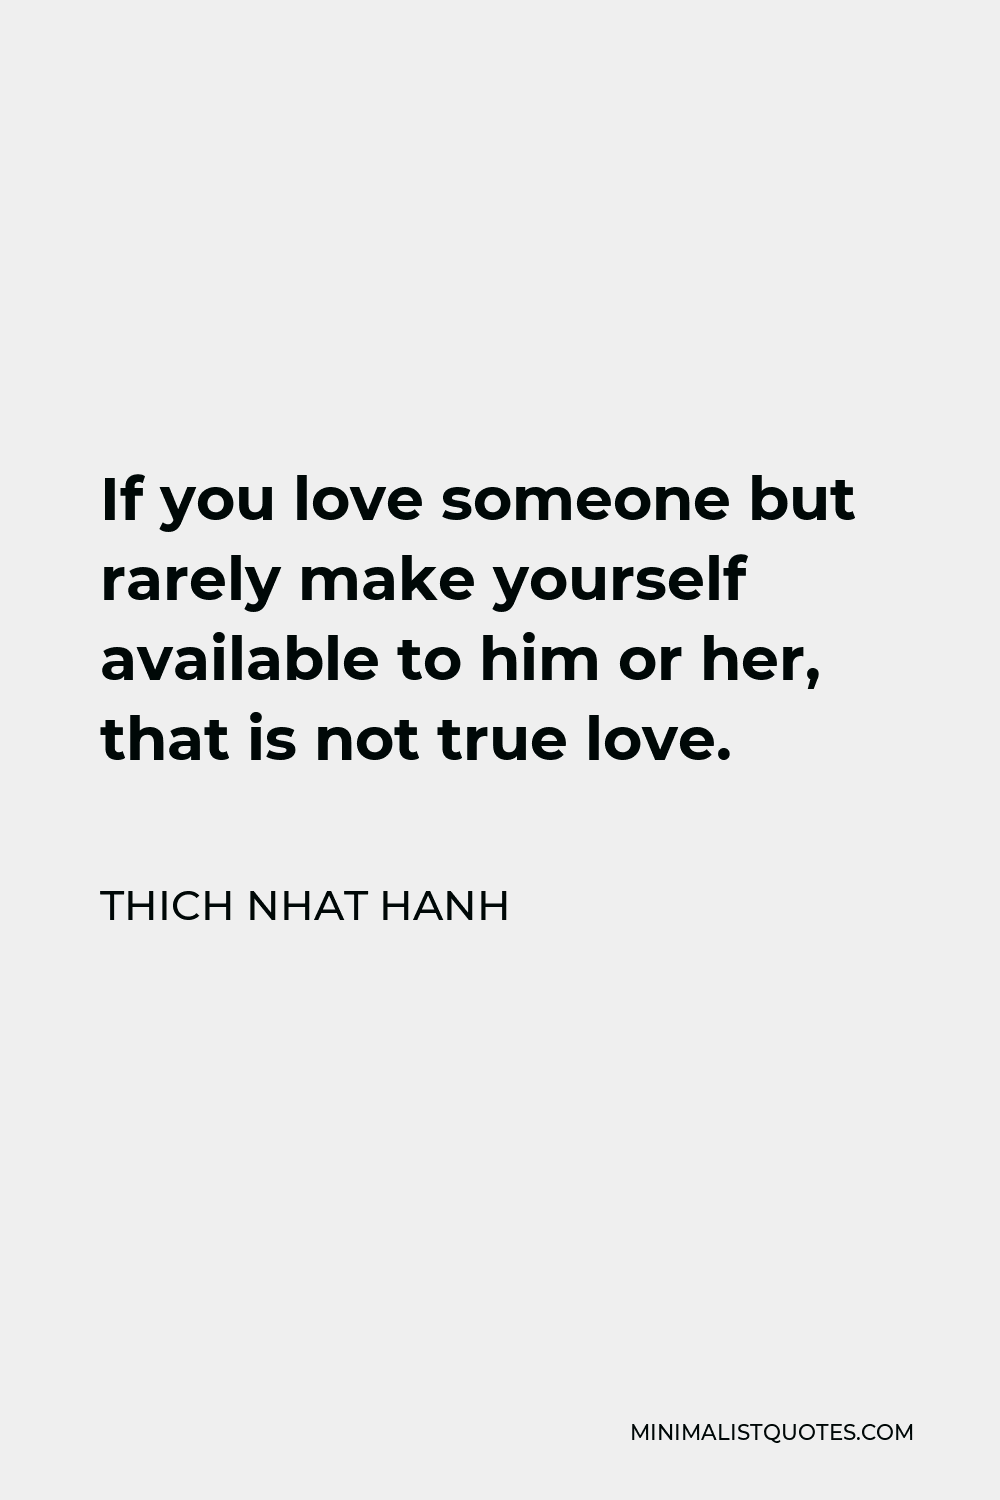 Thich Nhat Hanh Quote - If you love someone but rarely make yourself available to him or her, that is not true love.